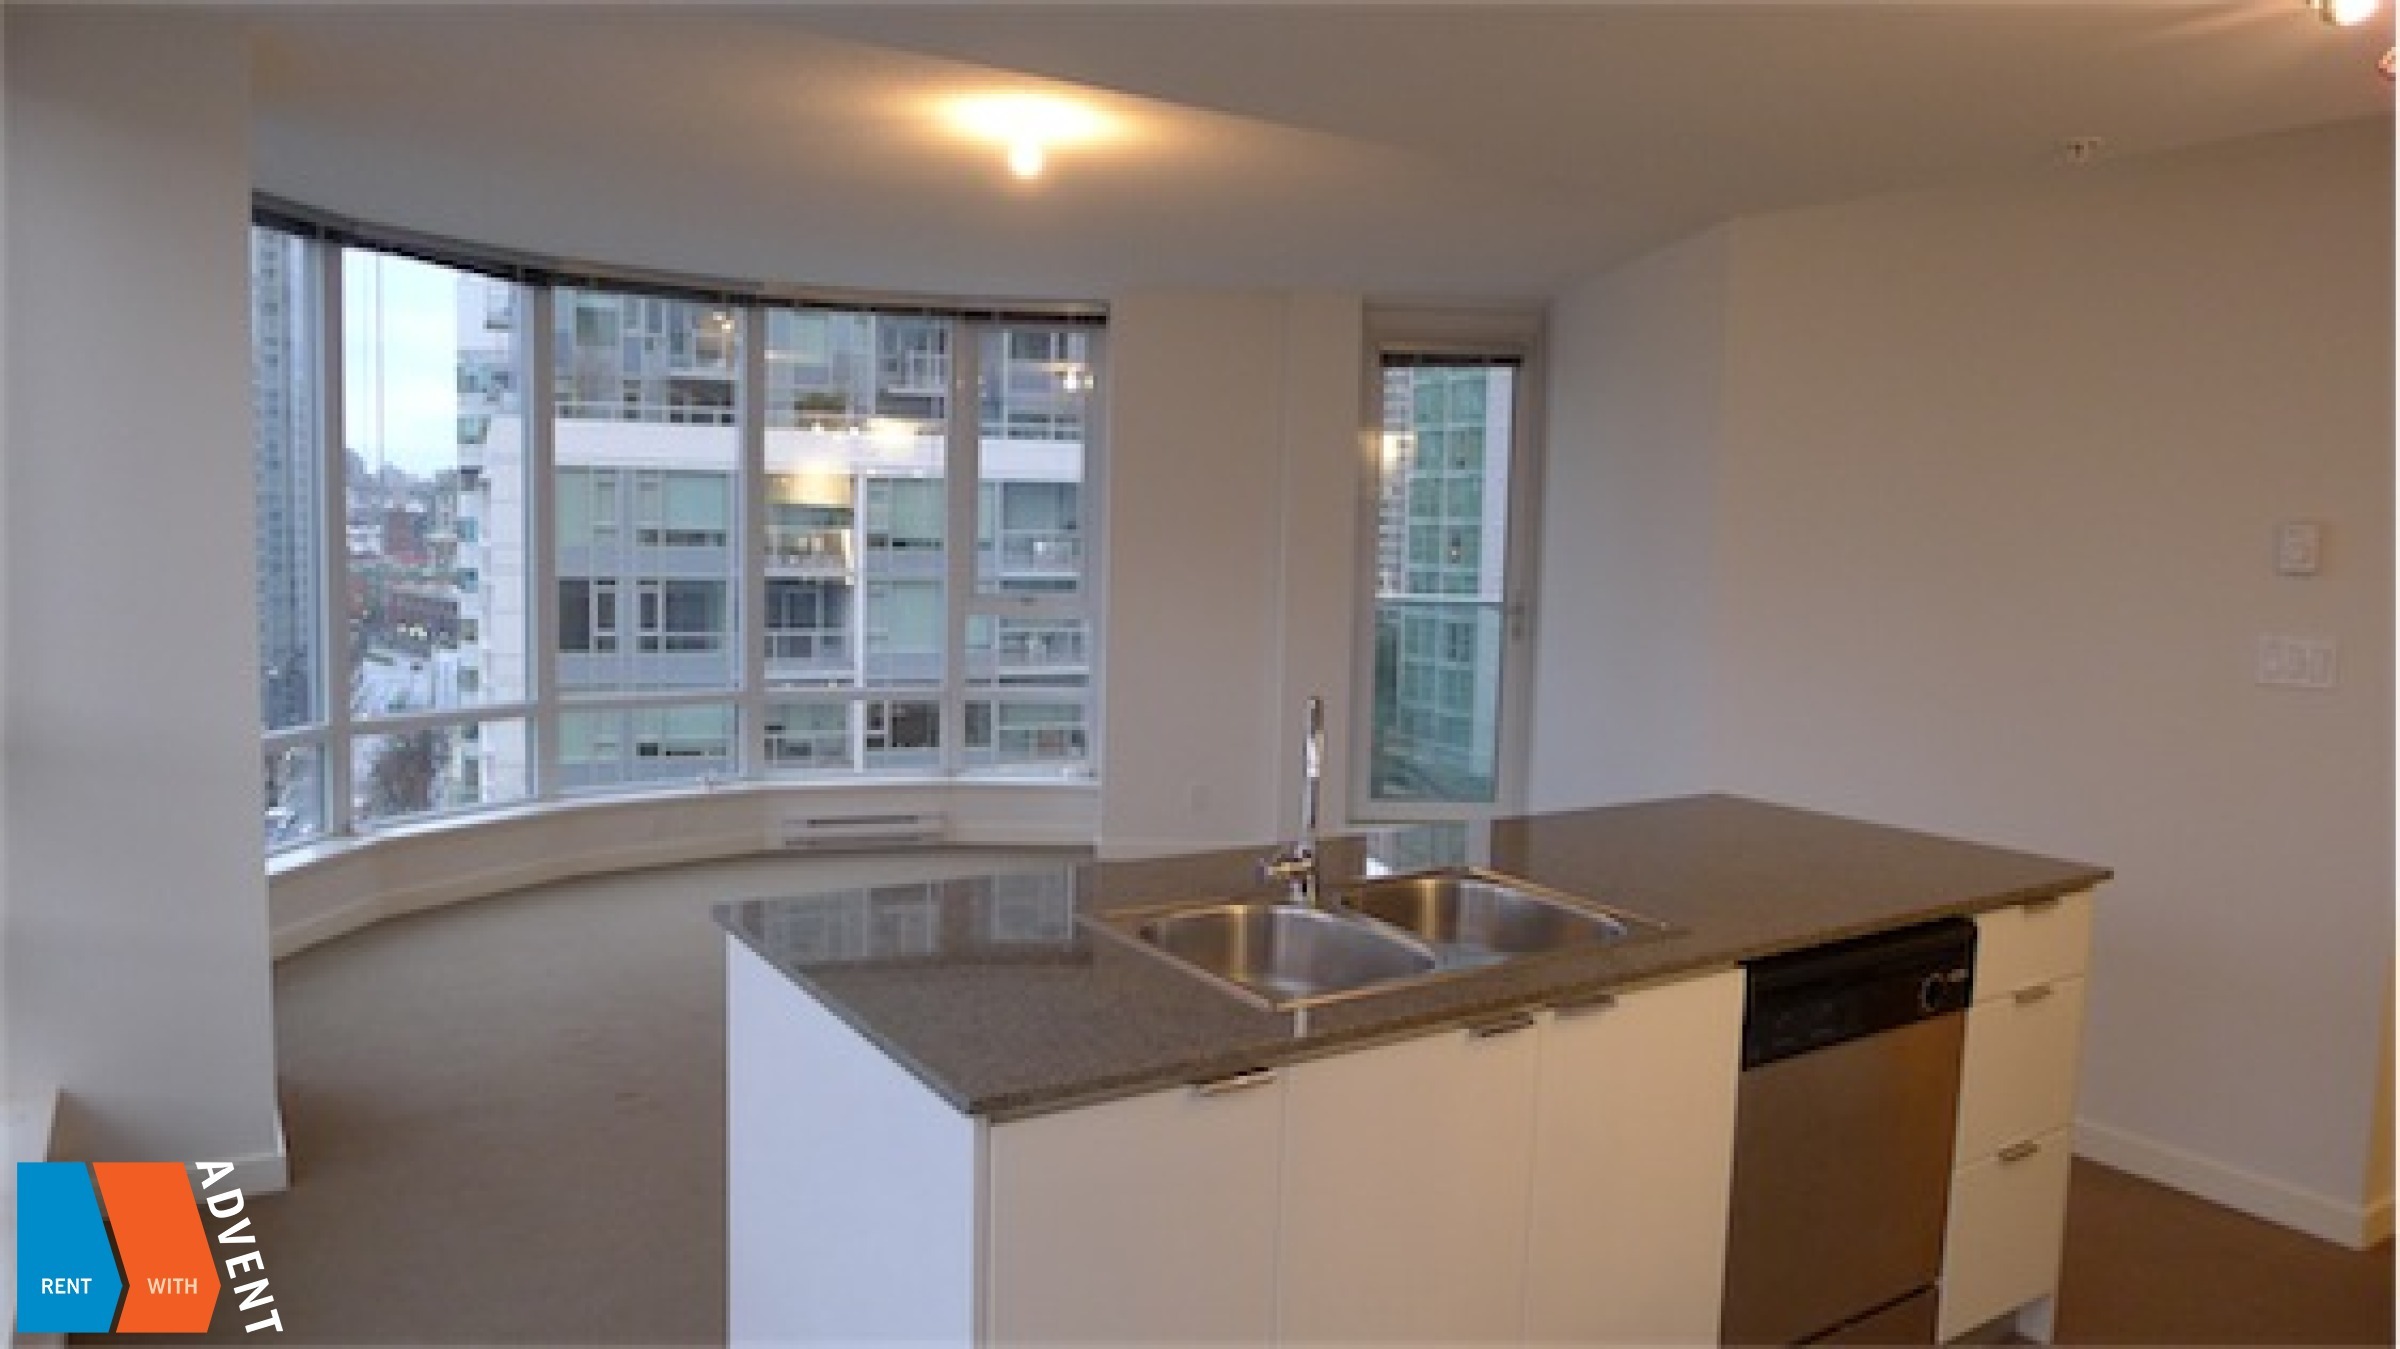 TV Towers 9th Floor 2 Bedroom Unfurnished Apartment Rental in Downtown Vancouver. 907 - 233 Robson Street, Vancouver, BC, Canada.